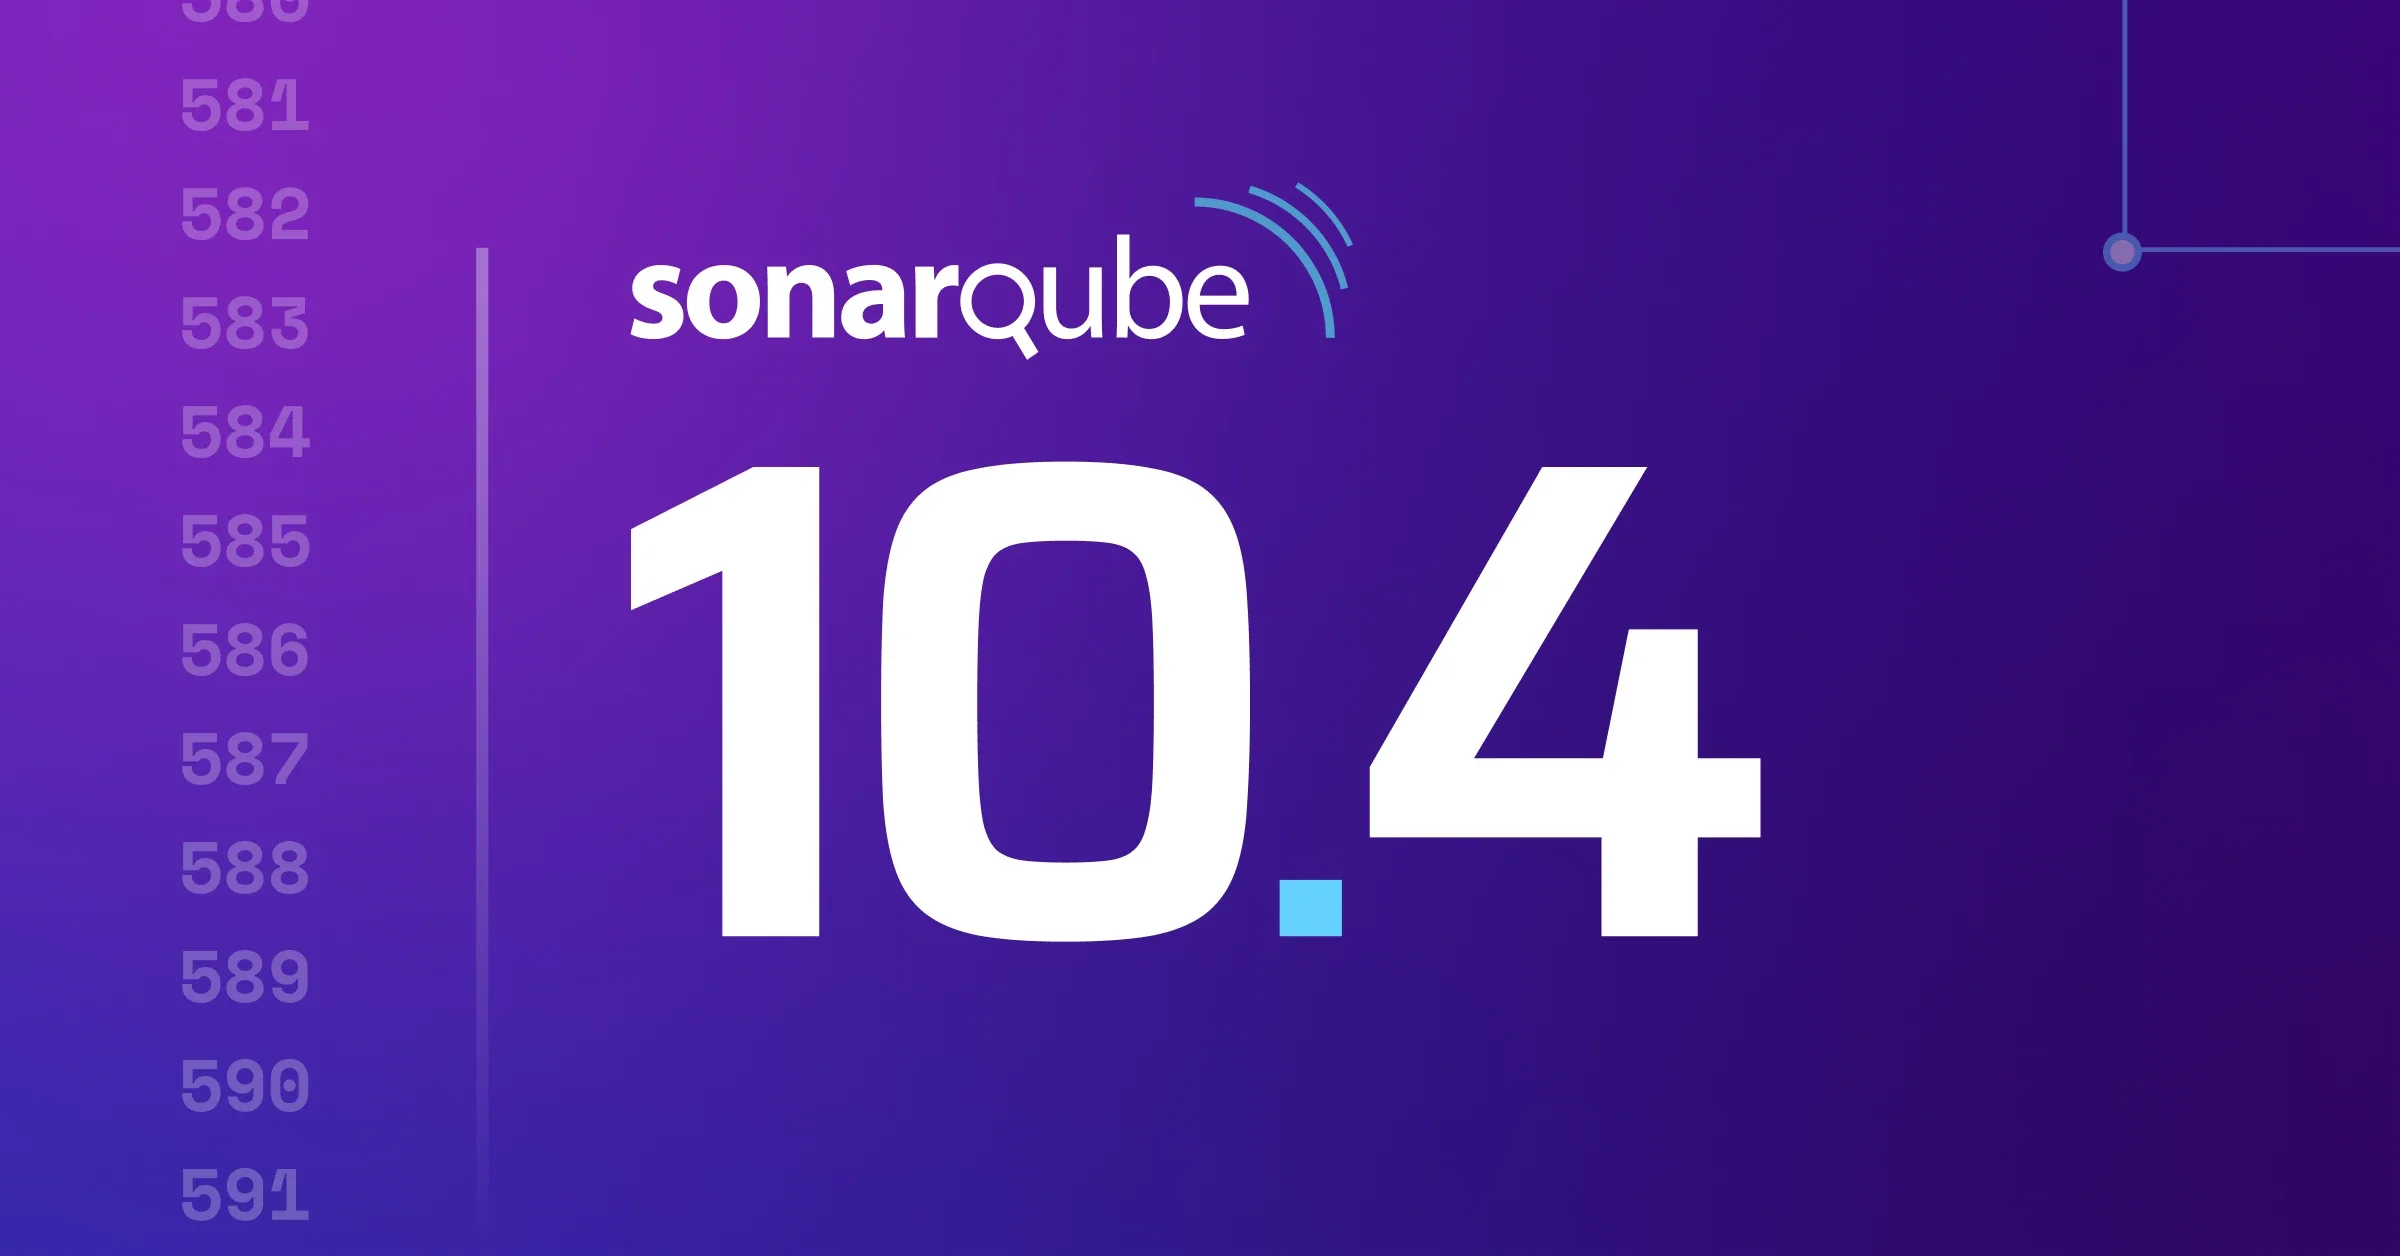 Picture showing SonarQube 10.4 release